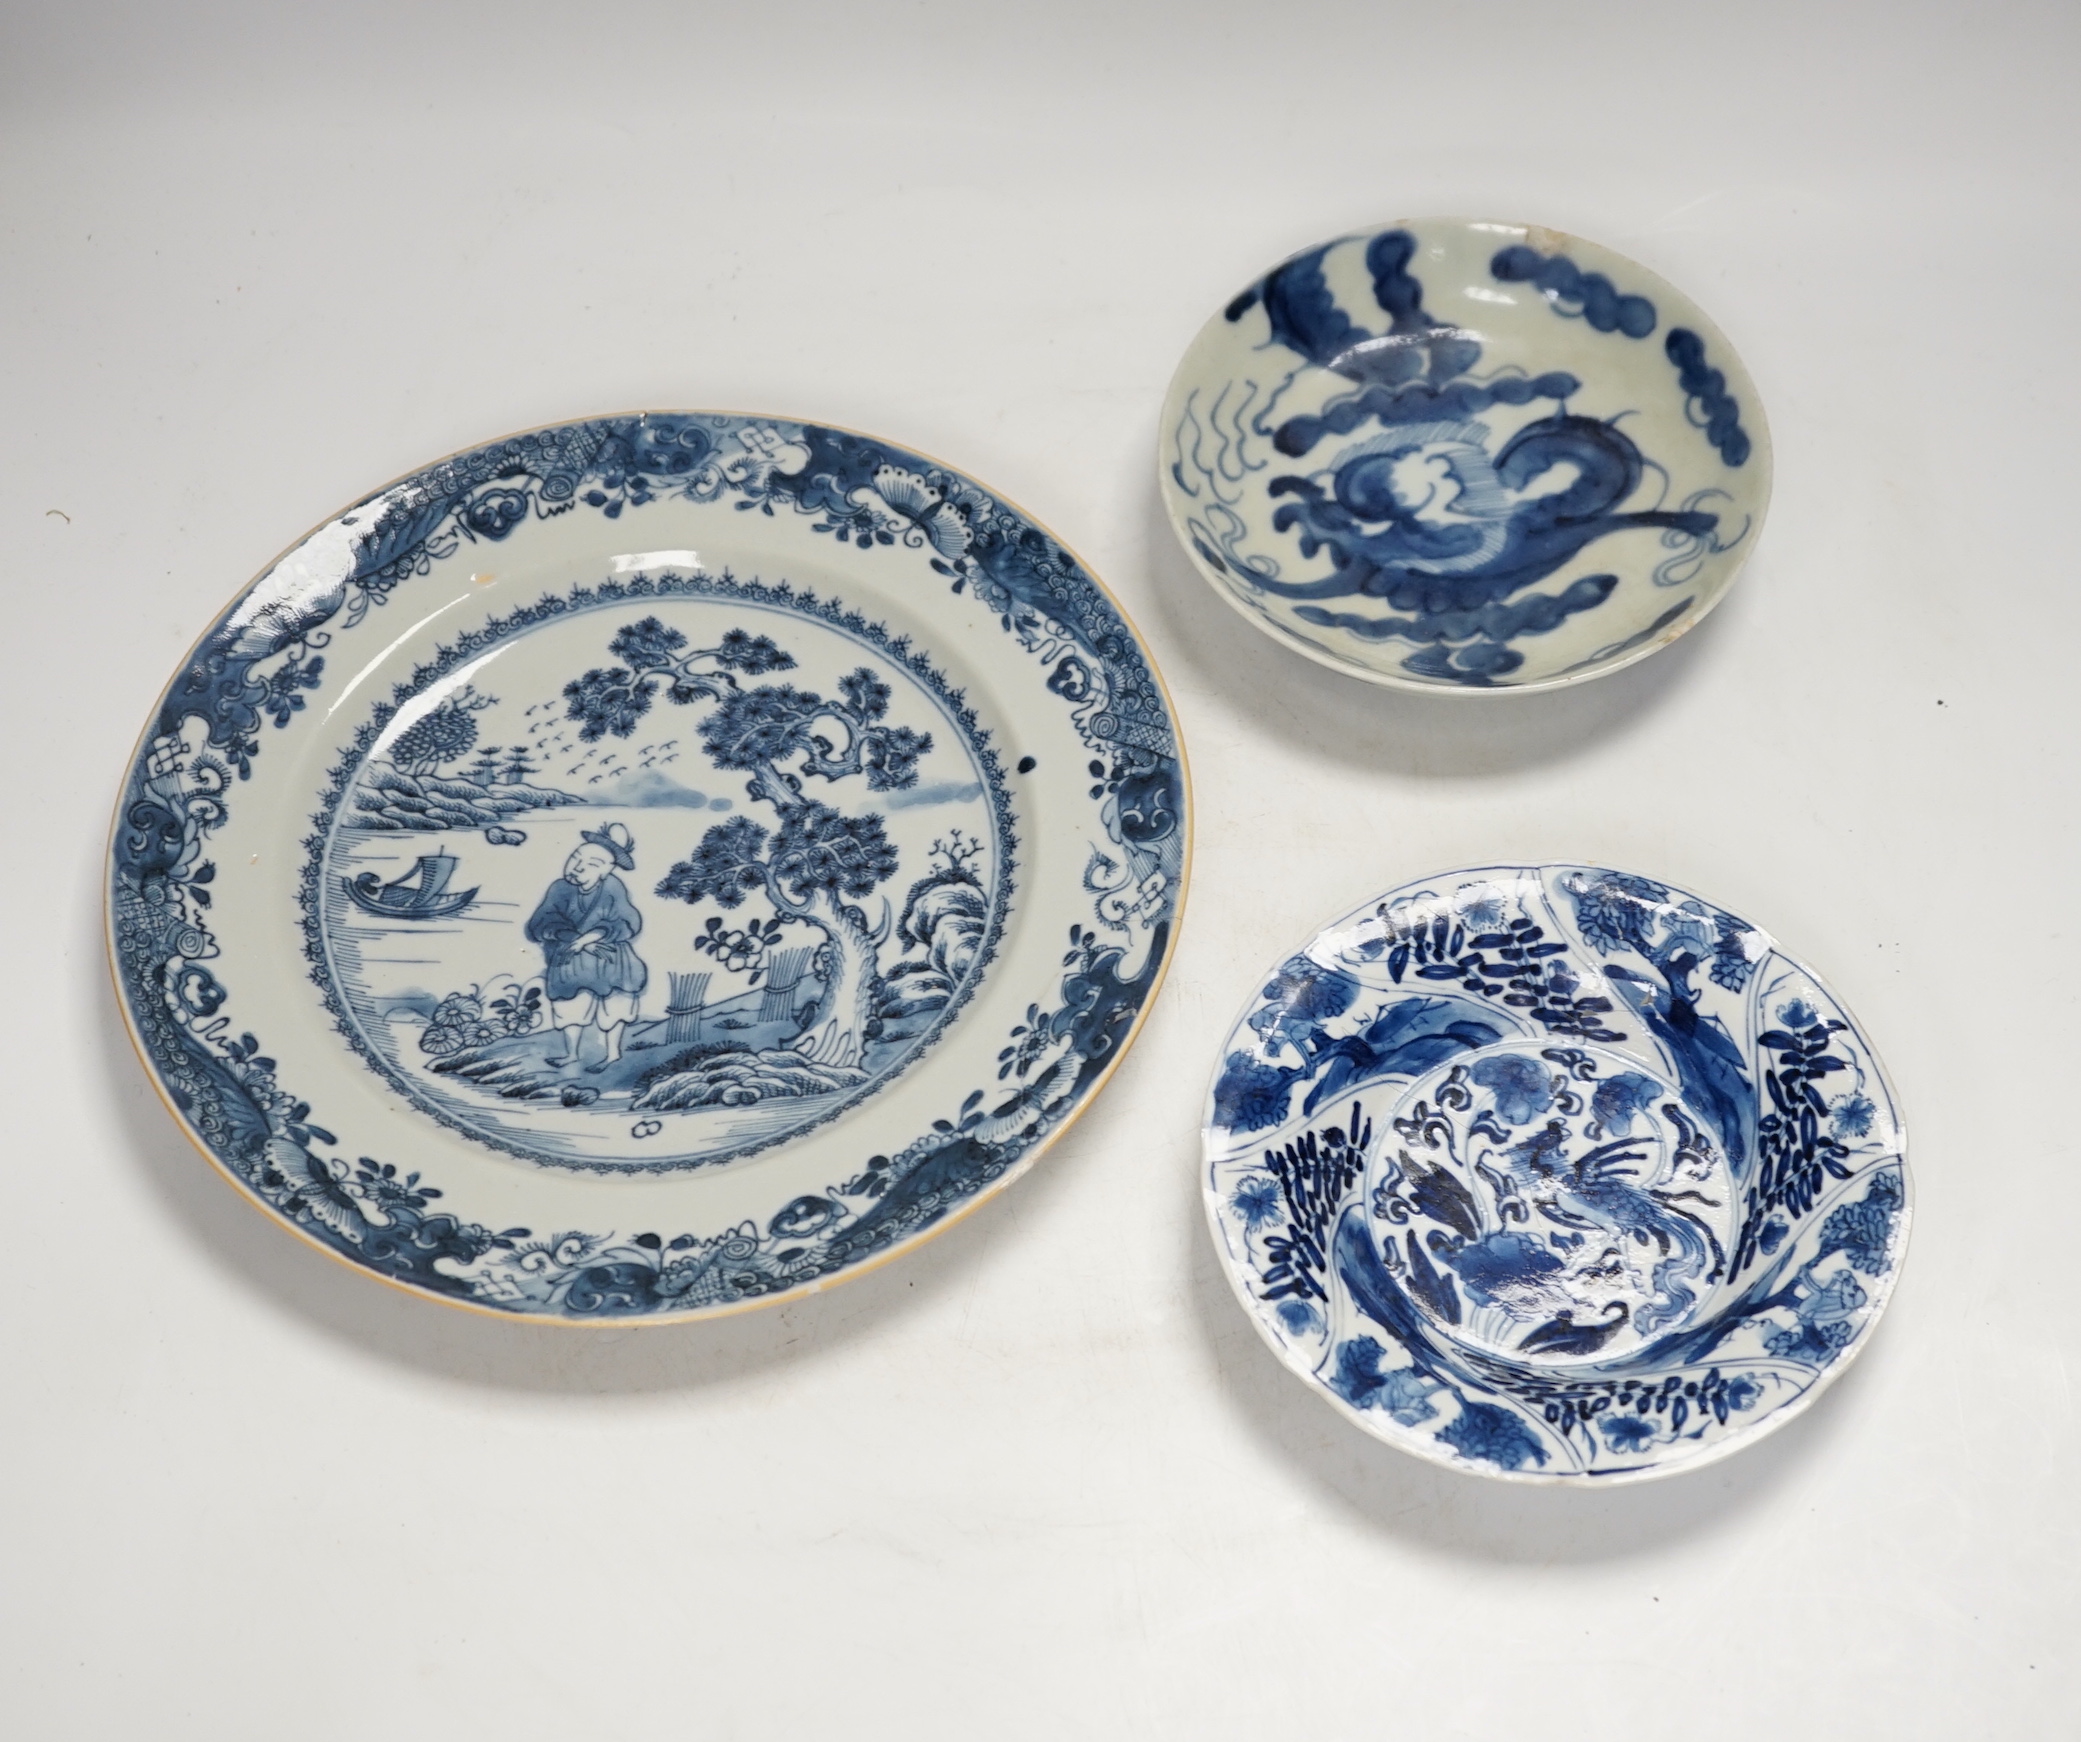 An 18th century Chinese export blue and white dish together with two others, largest 26cm